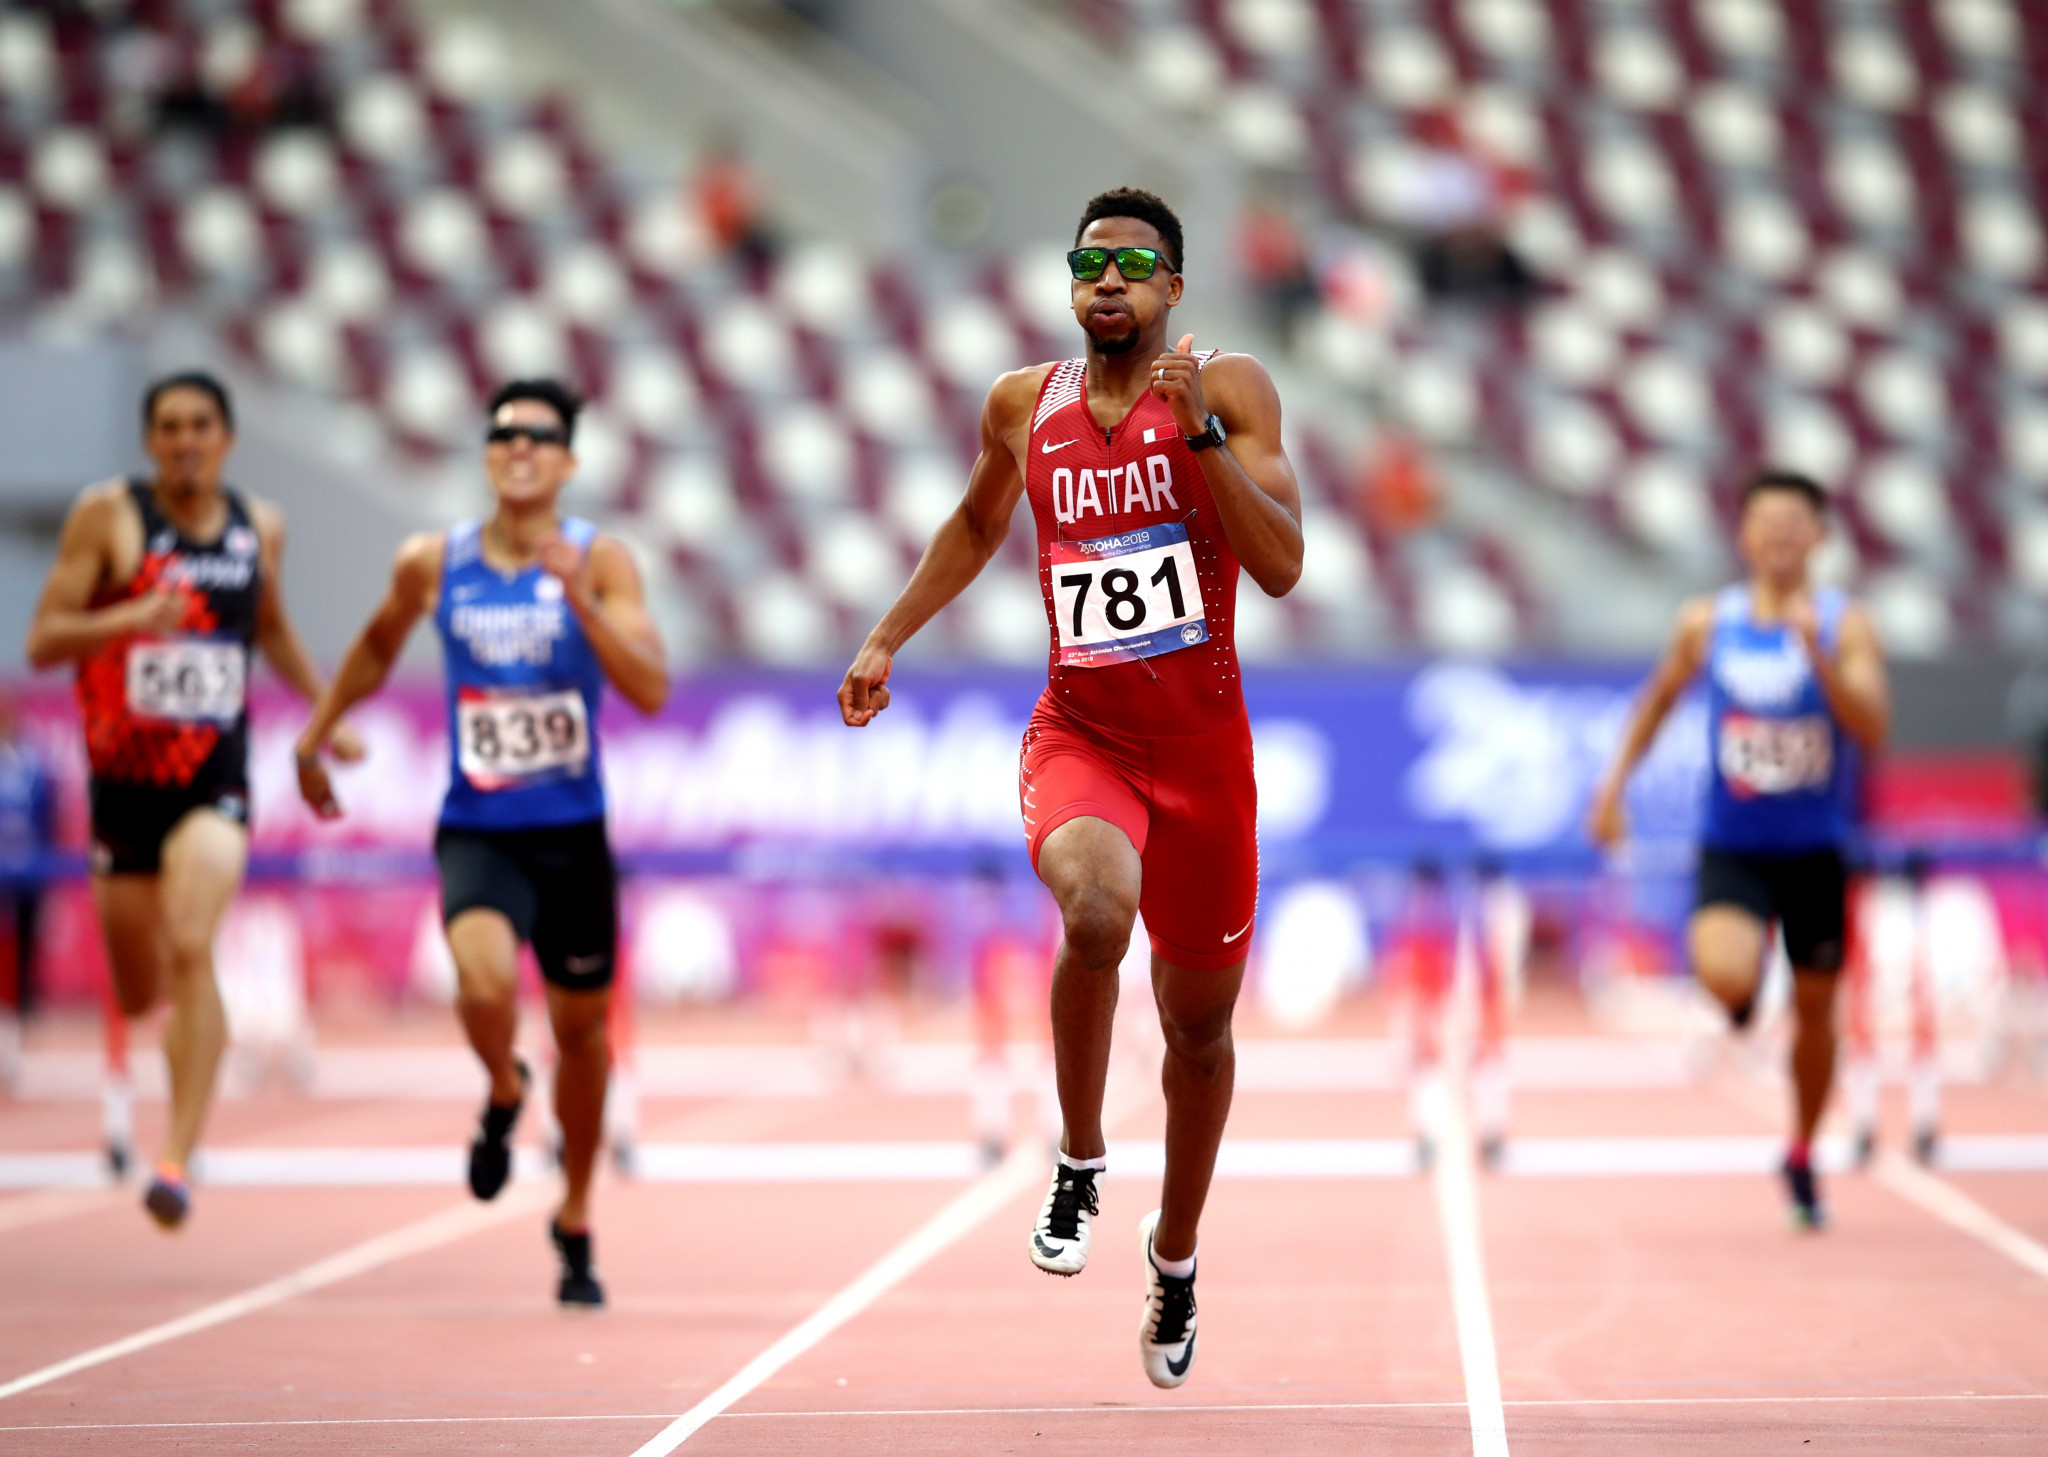 Qatar's Abderrahman Samba is among the favourites for the gold medal in the 400m hurdles at the IAAF World Championships in Doha in an event that could be particularly memorable ©Getty Images